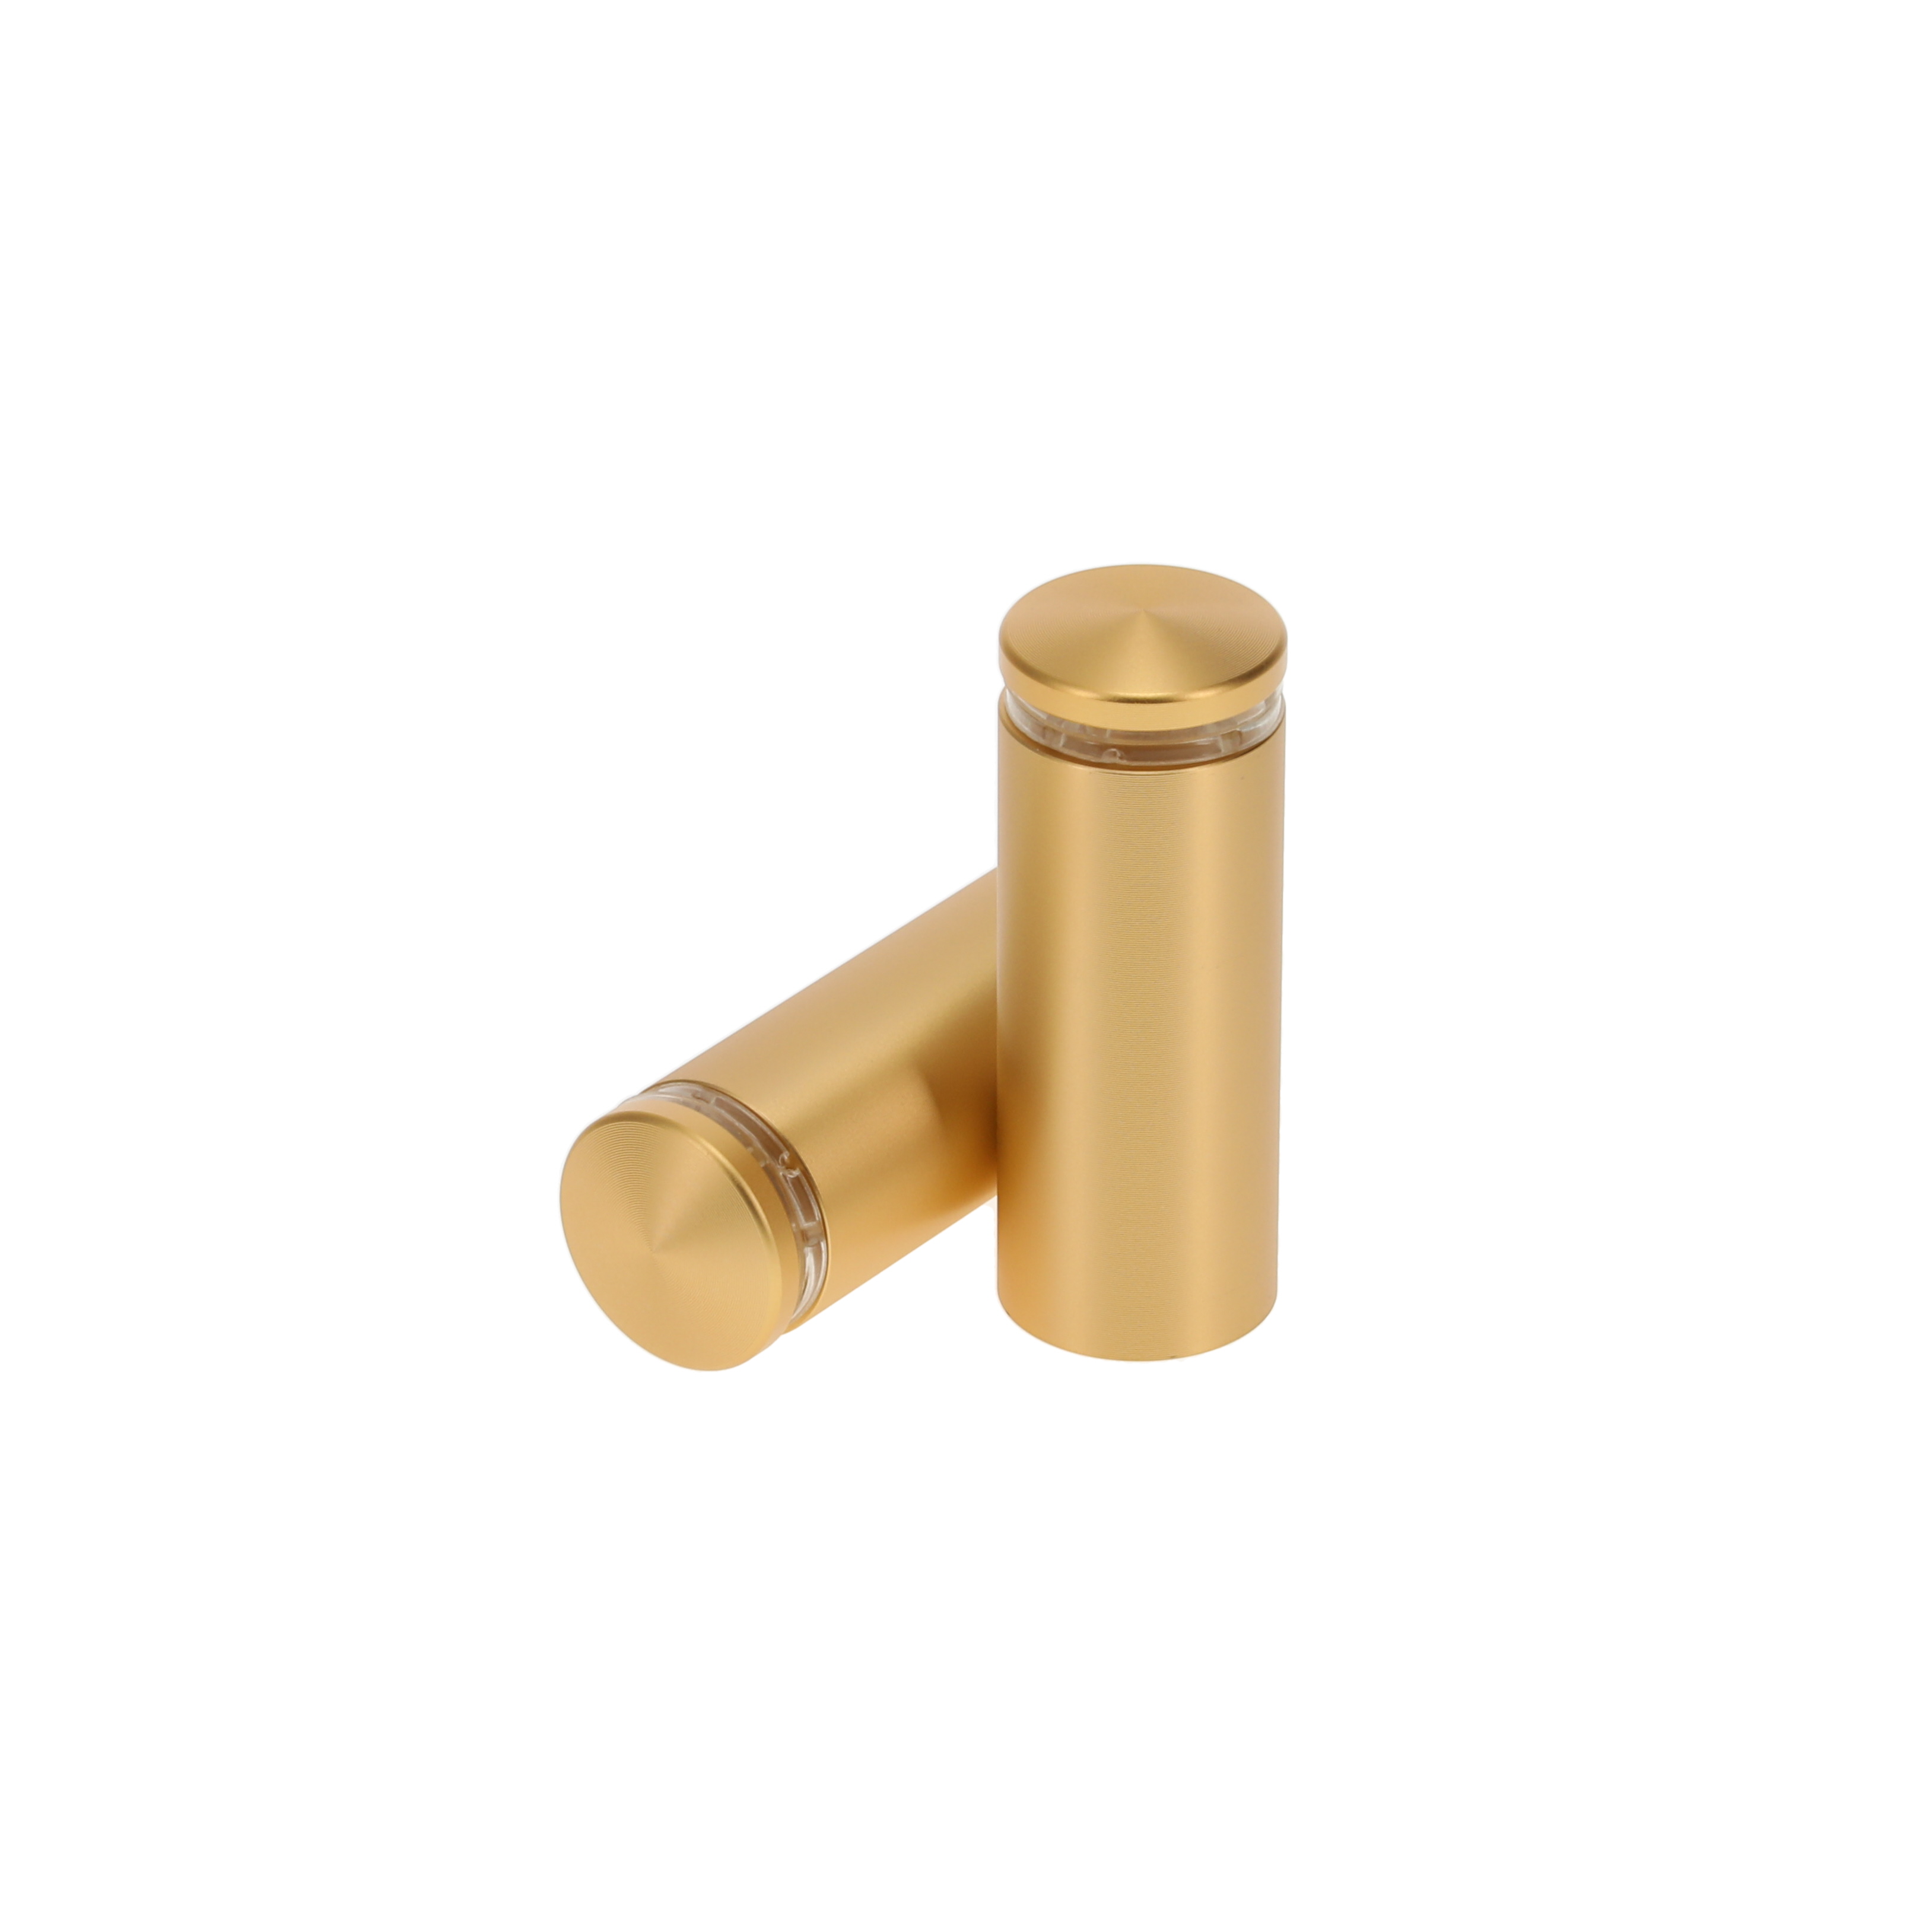 3/4'' Diameter X 1-3/4'' Barrel Length, Aluminum Rounded Head Standoffs, Matte Champagne Anodized Finish Easy Fasten Standoff (For Inside / Outside use) [Required Material Hole Size: 7/16'']